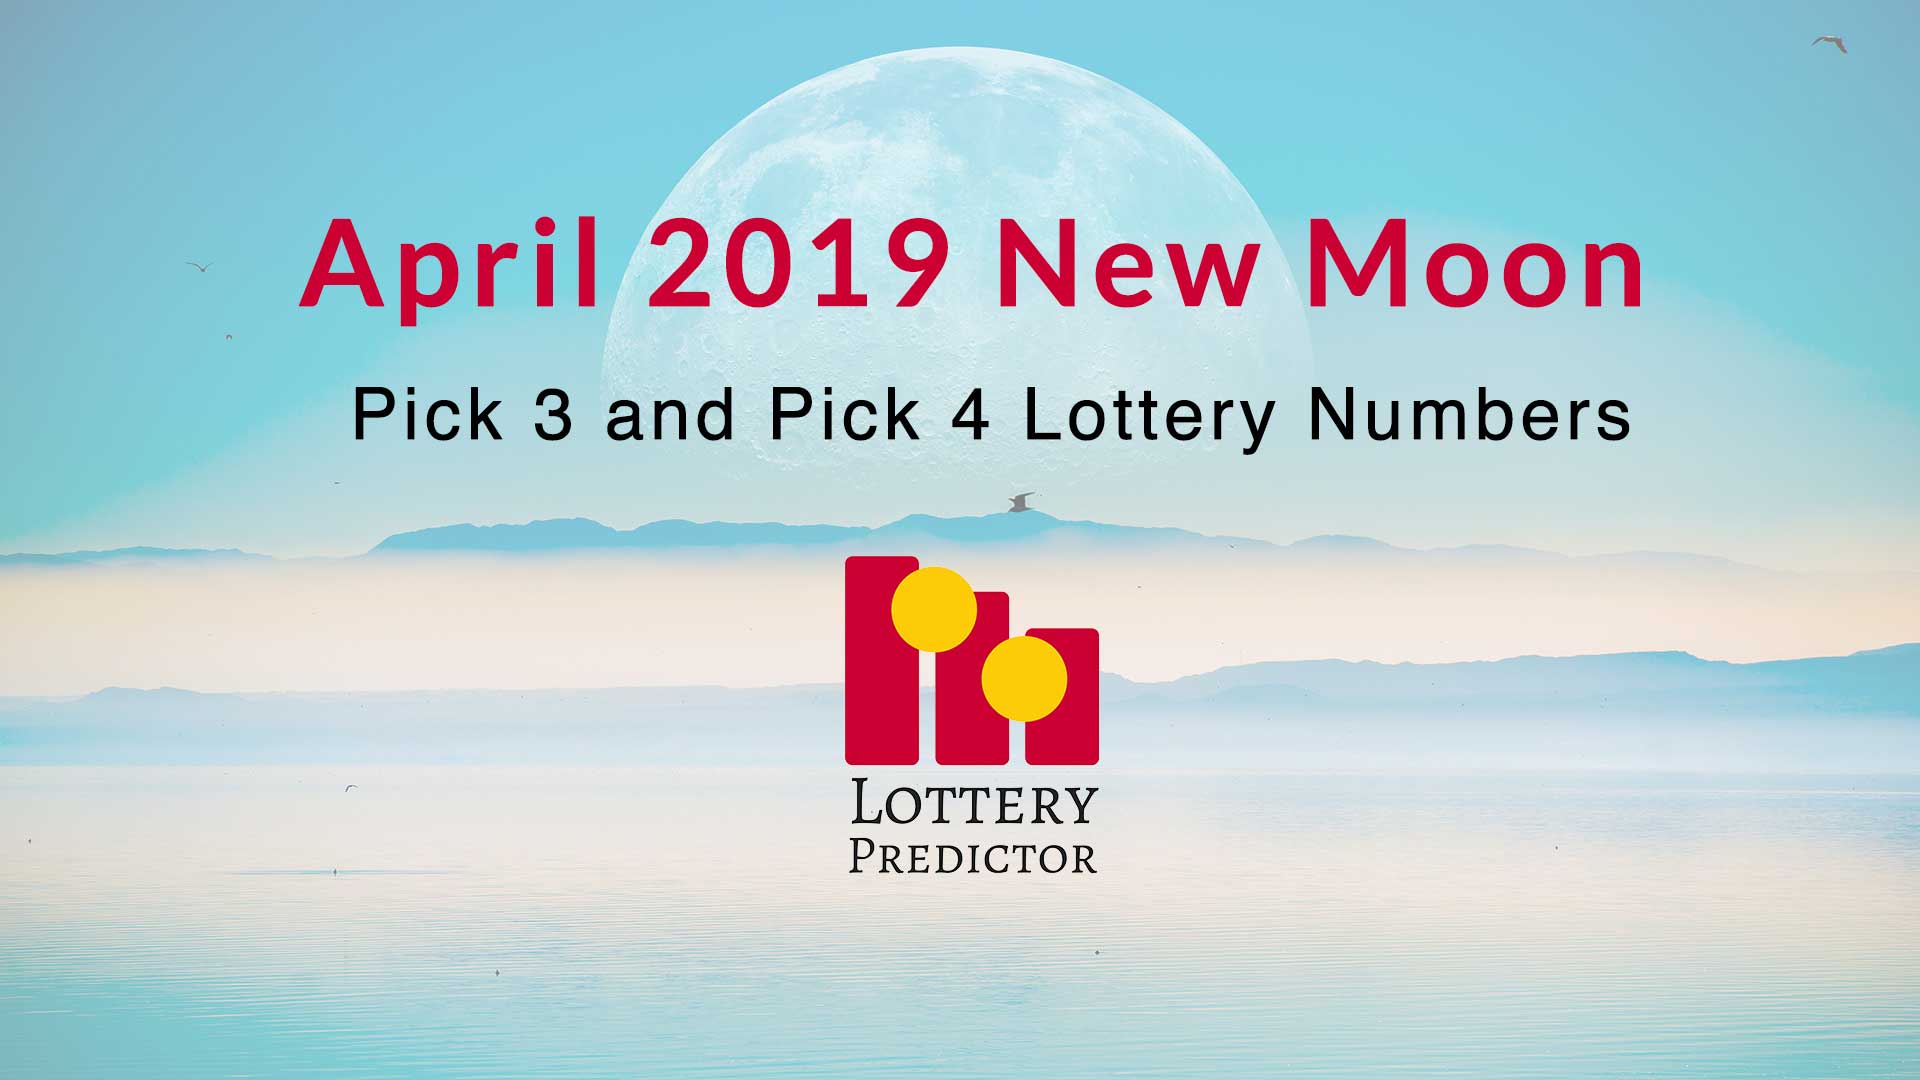 April New Moon Pick 3 and Pick 4 Lottery Number Predictions